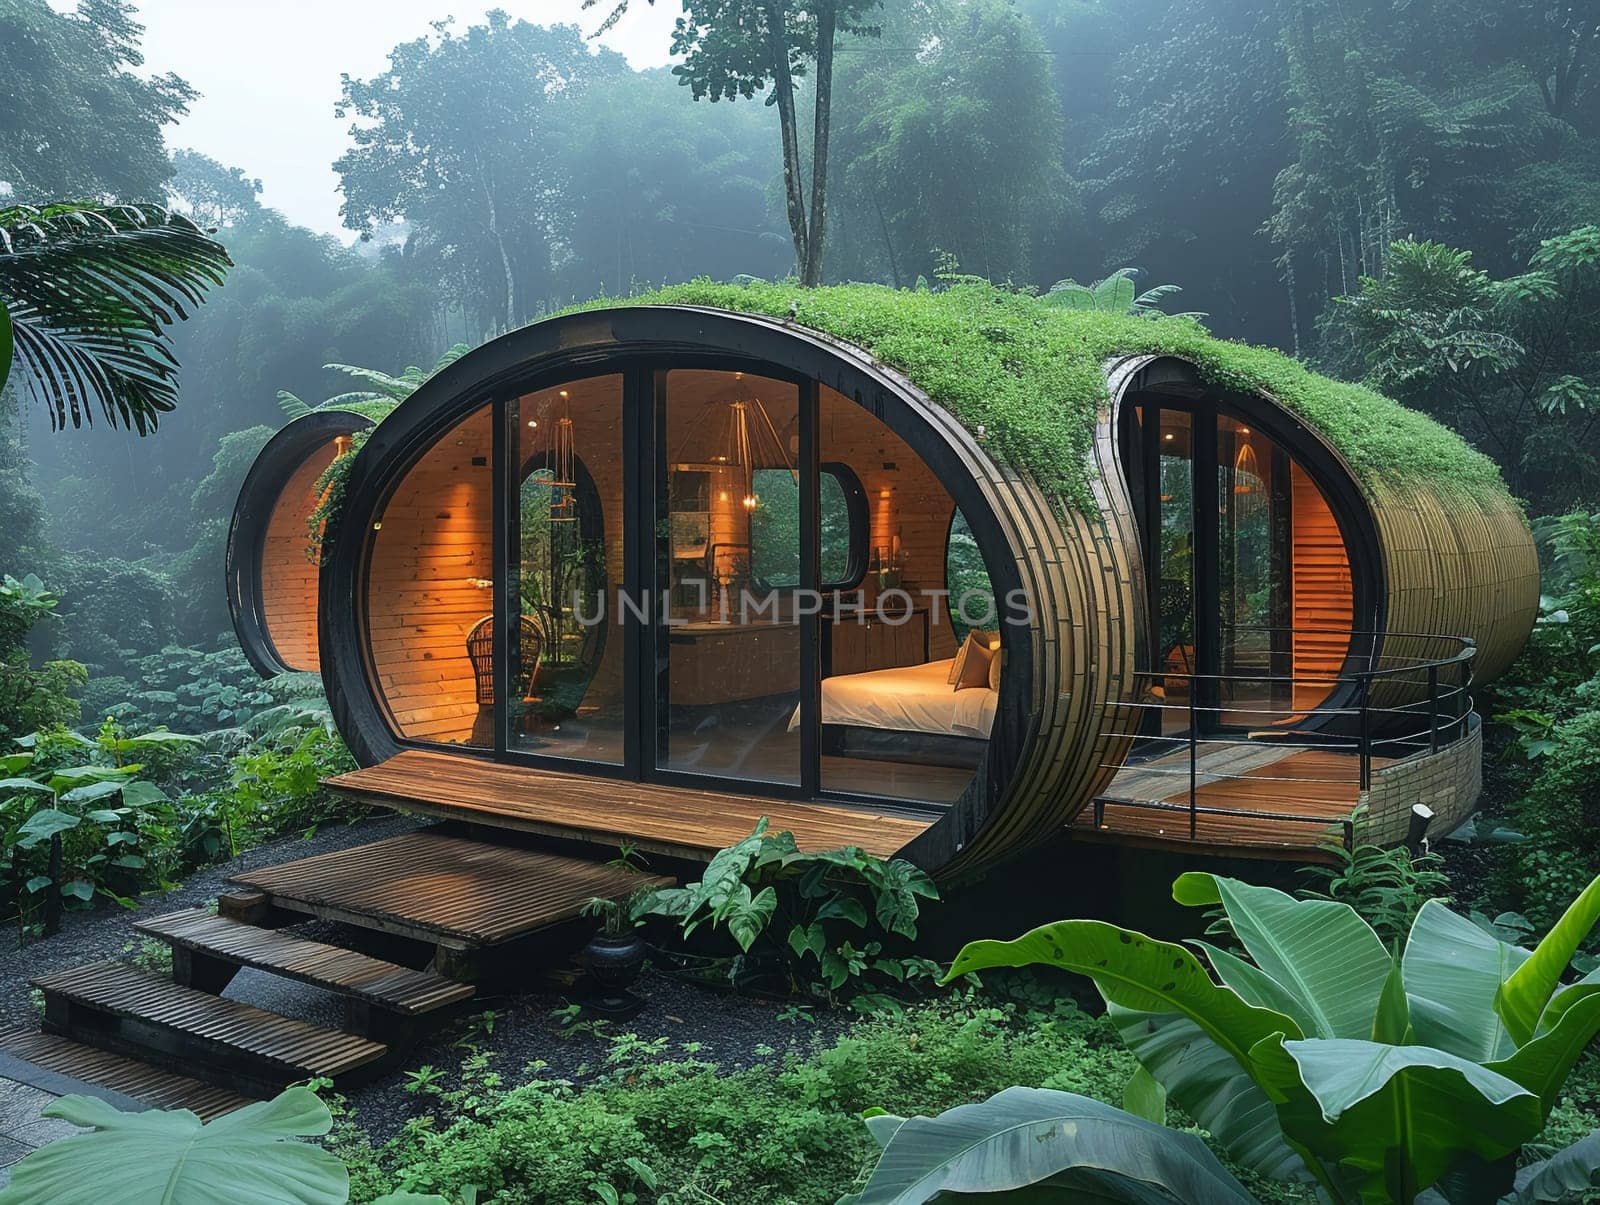 Sustainable Bamboo Structure Promoting Eco-Tourism, bamboo eco-pod in a serene natural environment.